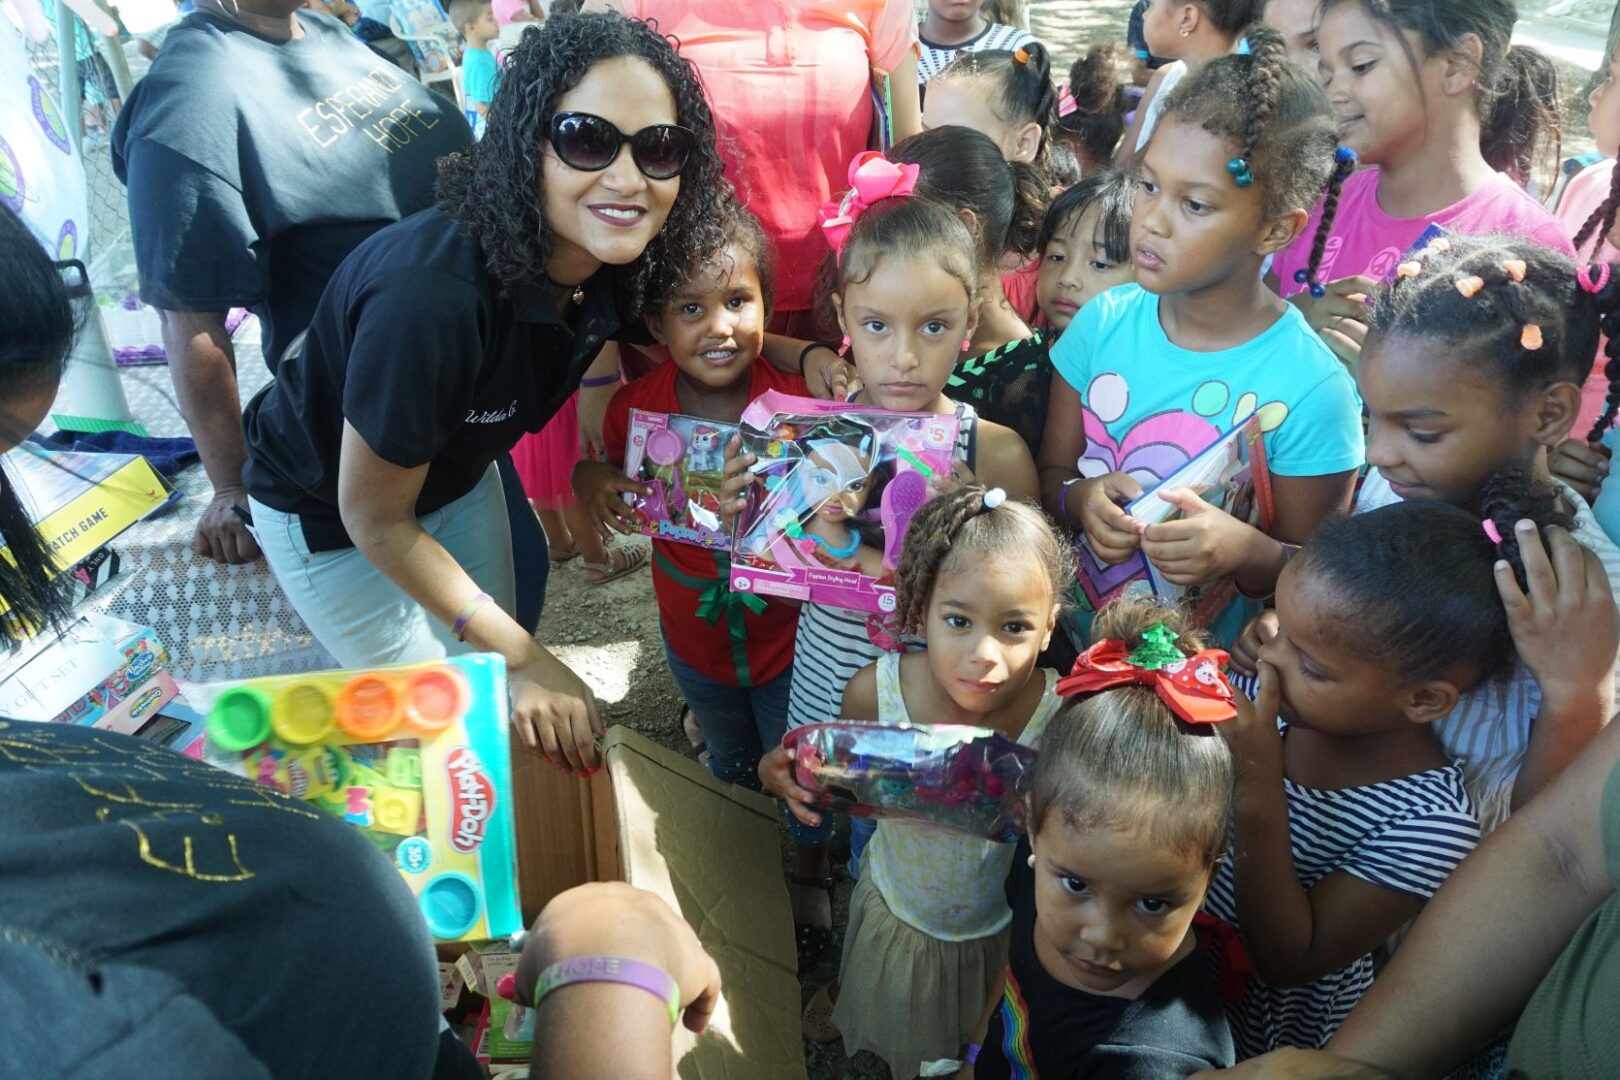 Our female staff and another group of young girls holding different kinds of dolls